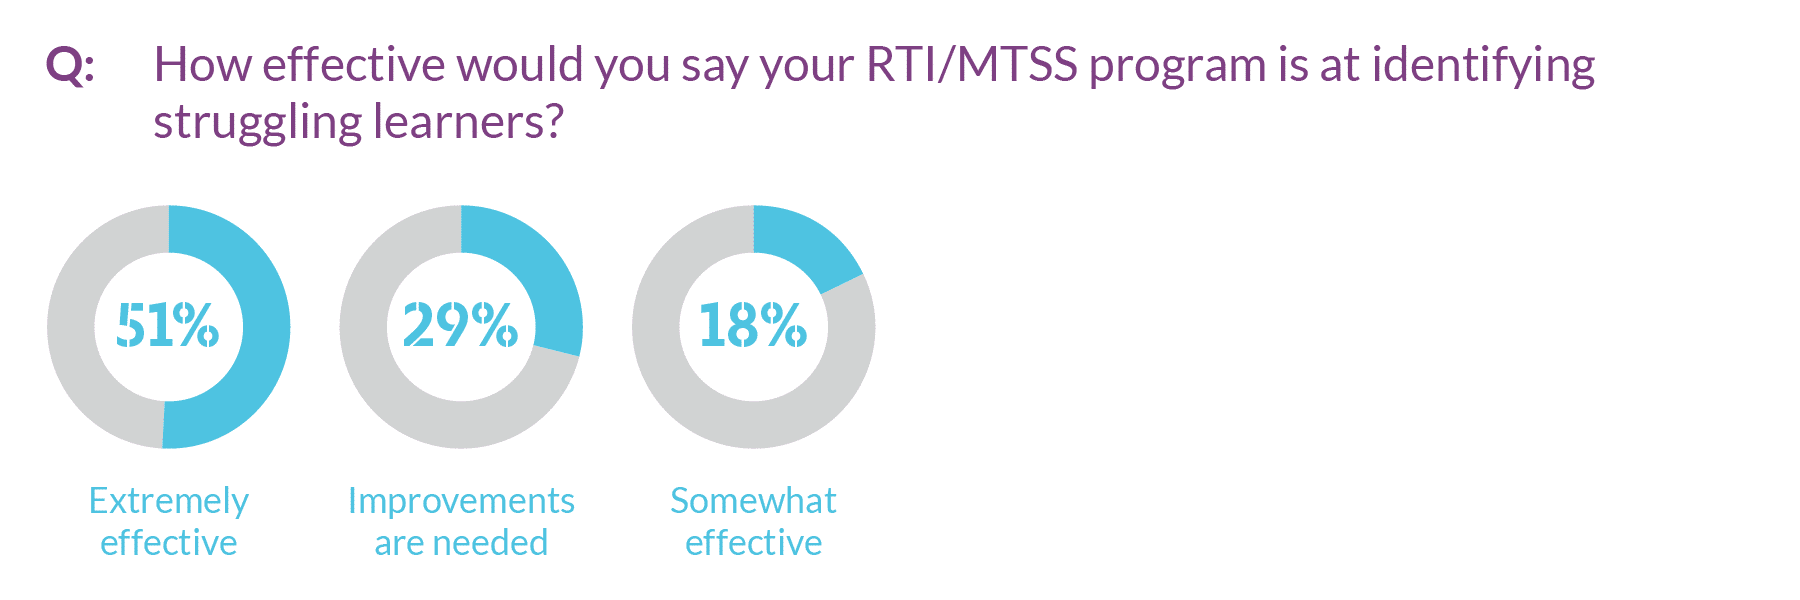 Graph showing how effective RTI/MTSS programs are at identifying struggling learners